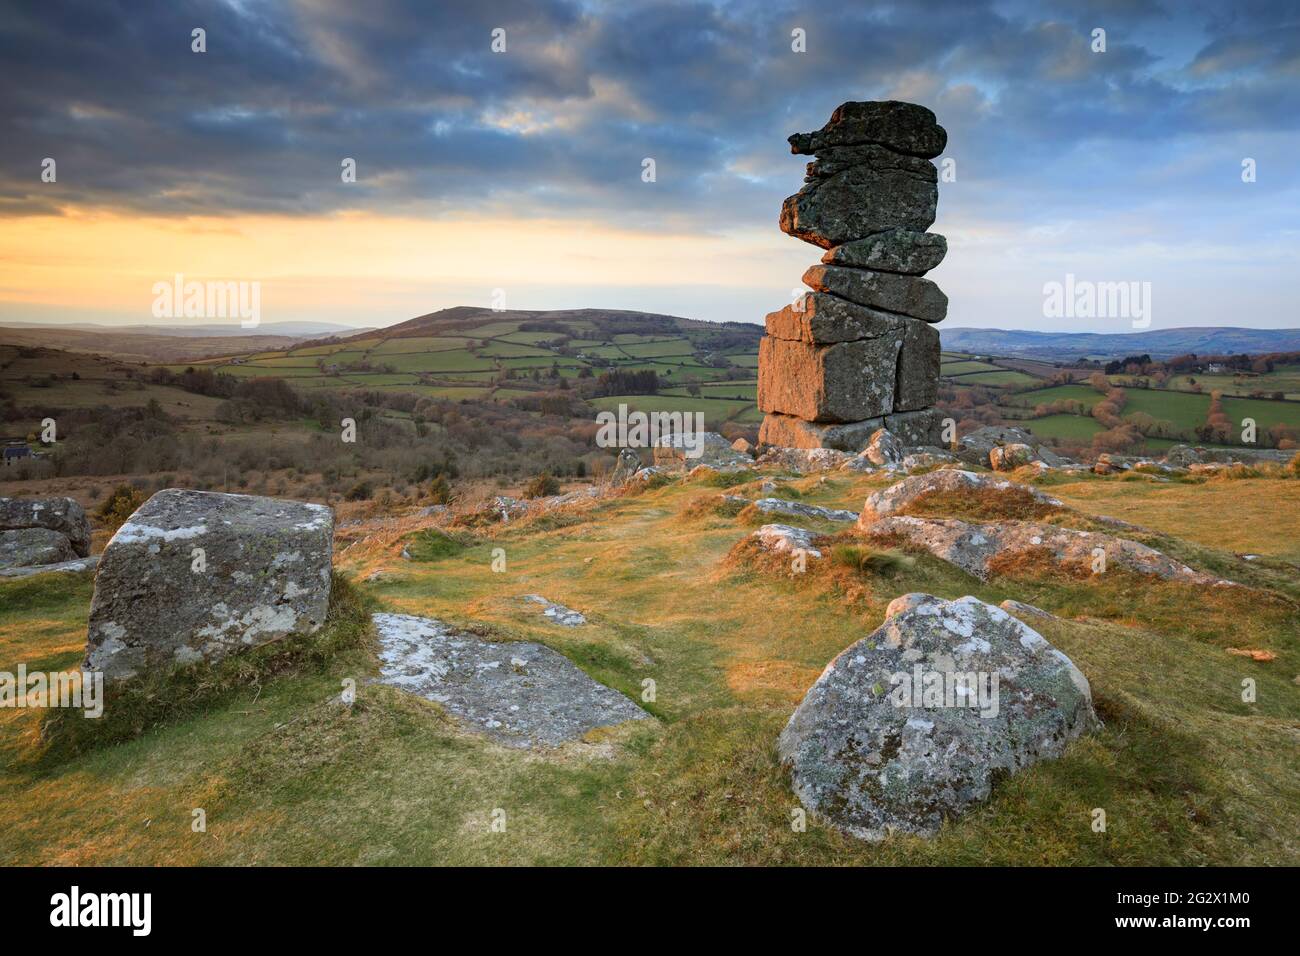 The Bowerman's Nose in the Dartmoor National Park illuminated by late evening sunlight. Stock Photo